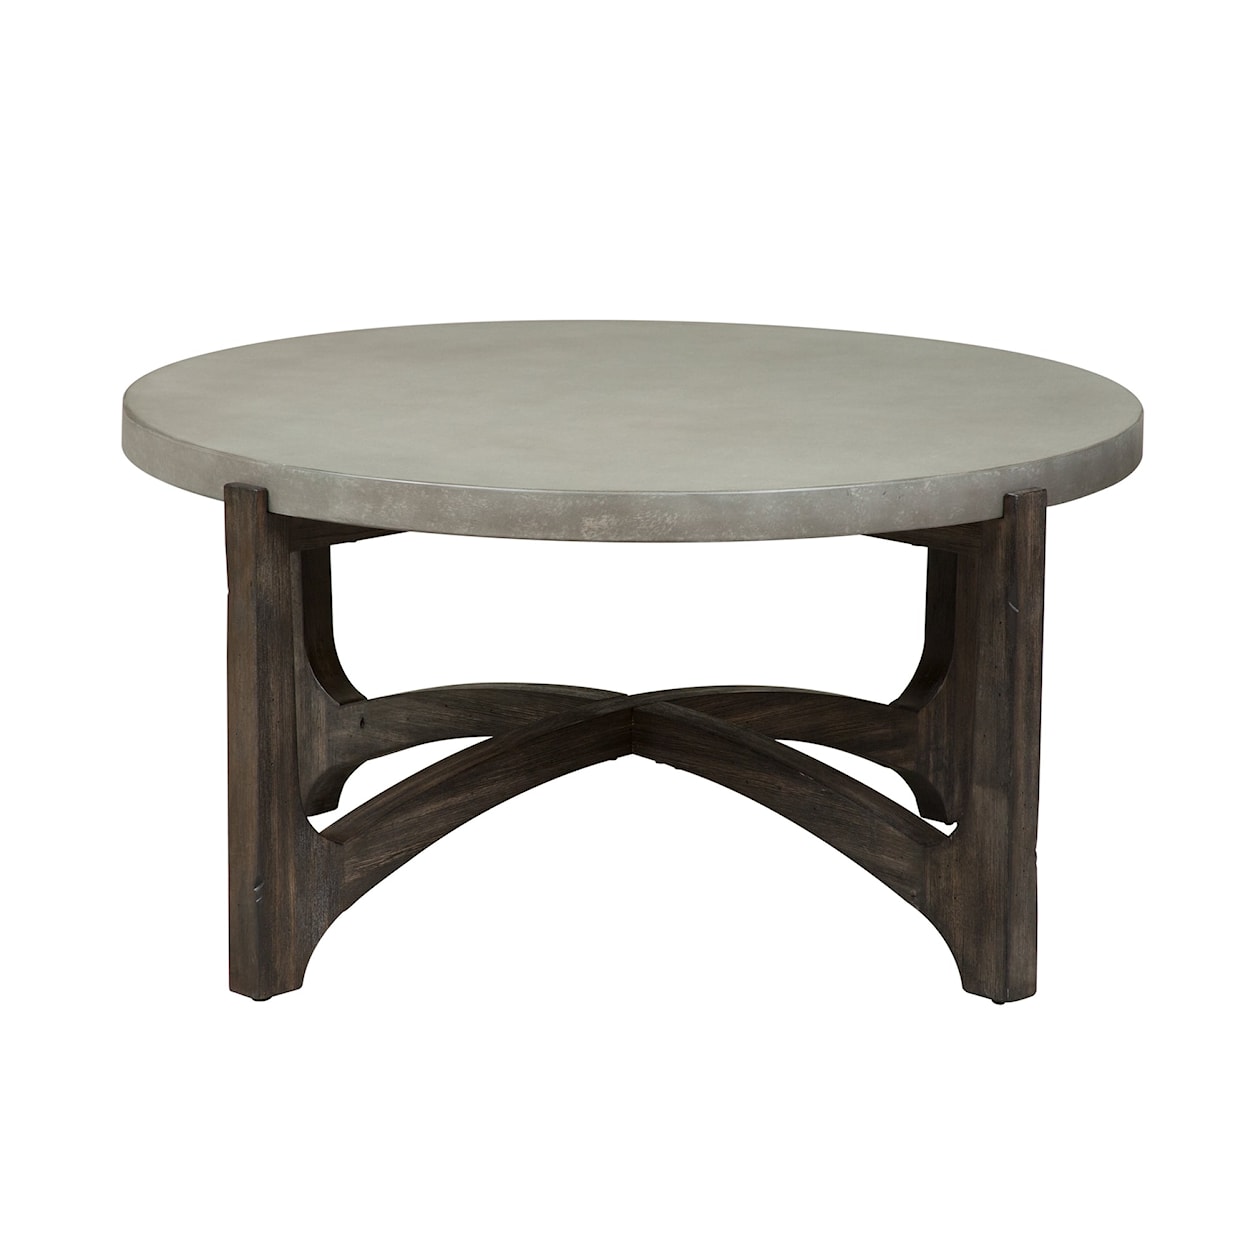 Libby Cato Optional 3-Piece Occasional Table Group